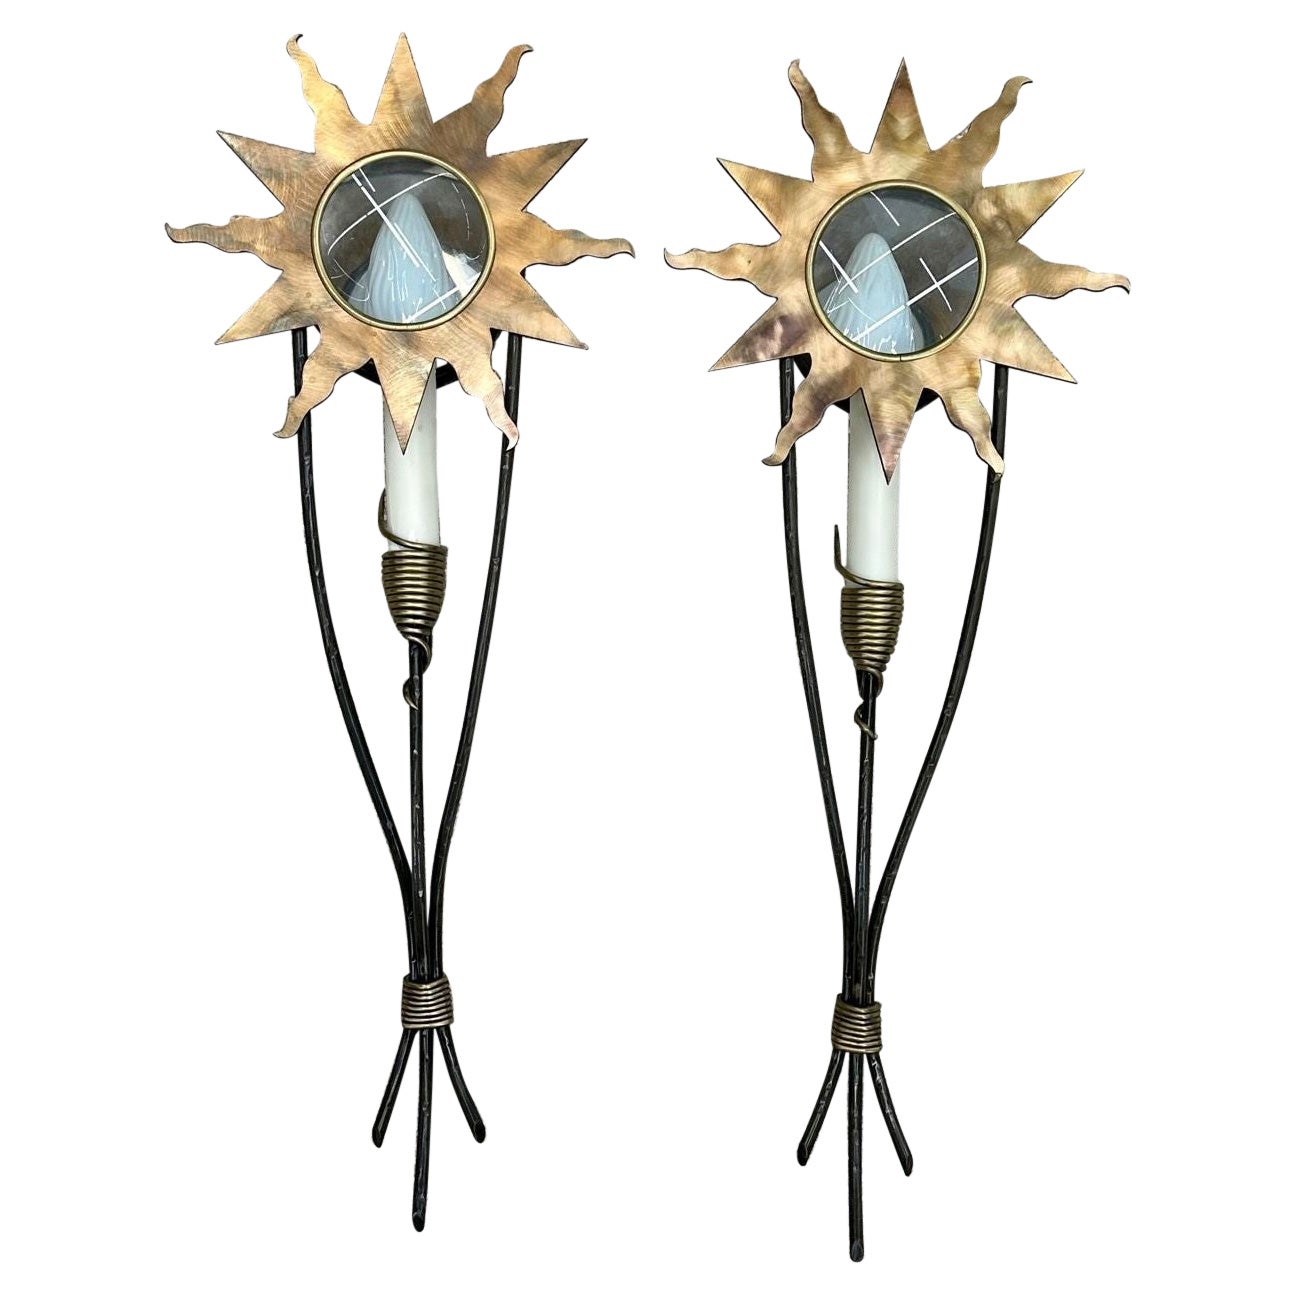 French Mid Century Modern, Olympia Star Sconces, Hammered Brass, Copper, 1960s For Sale